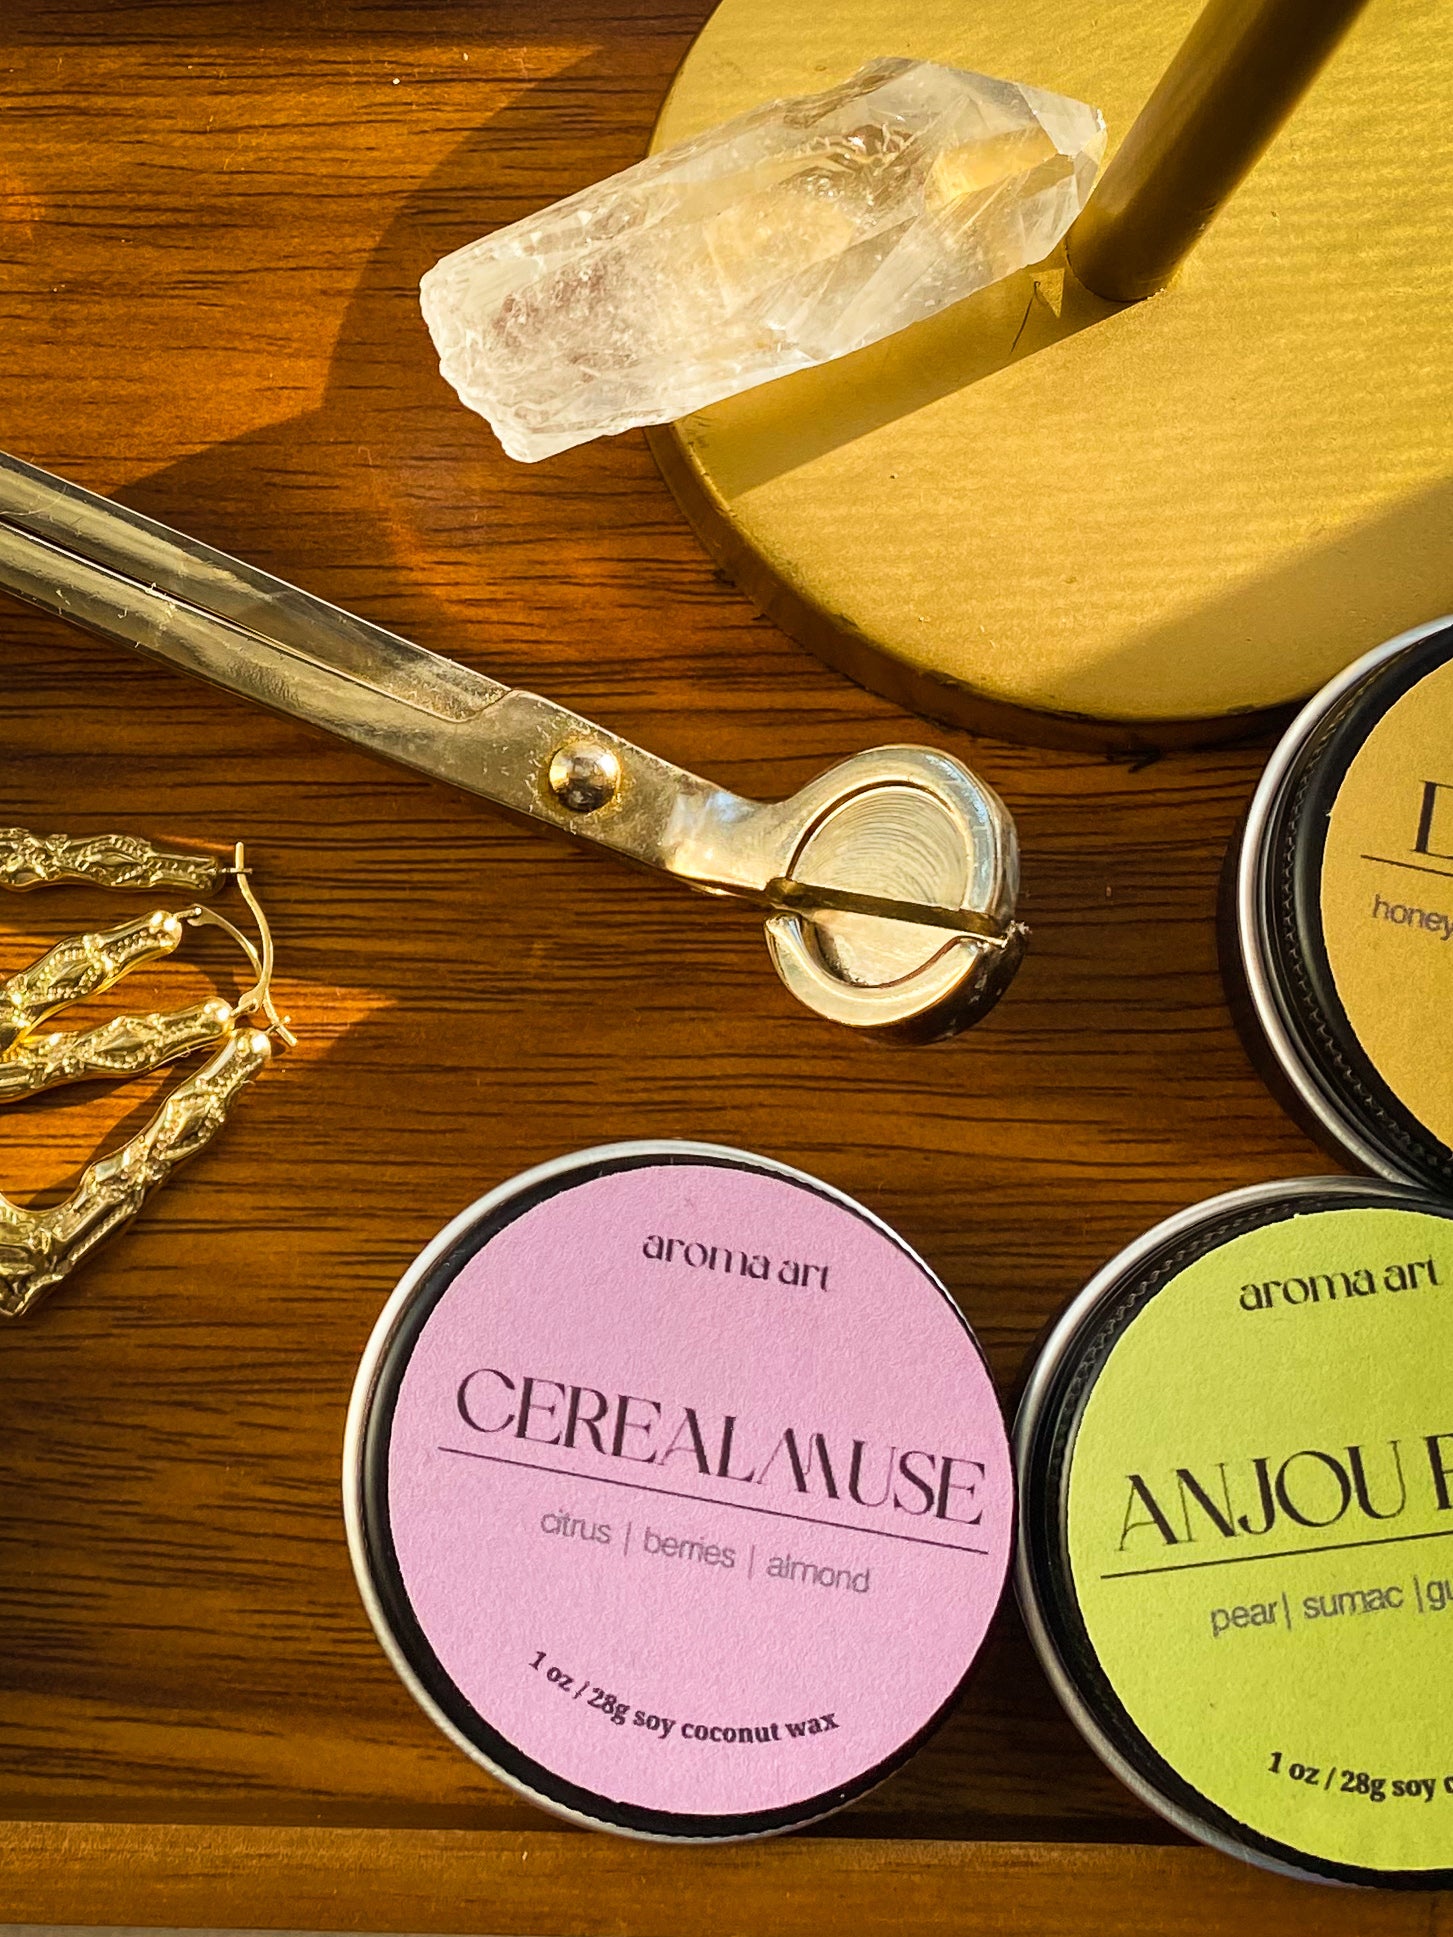 Artfully arranged on a wooden table with a wick trimmer and a crystal are travel sized tin candles in the scents Cereal Muse (notes of citrus, berries, and almond), Anjou Pear (notes of pear, sumac, and guaiac wood), and Dazzling (notes of honey, orange marmalade, and tobacco).